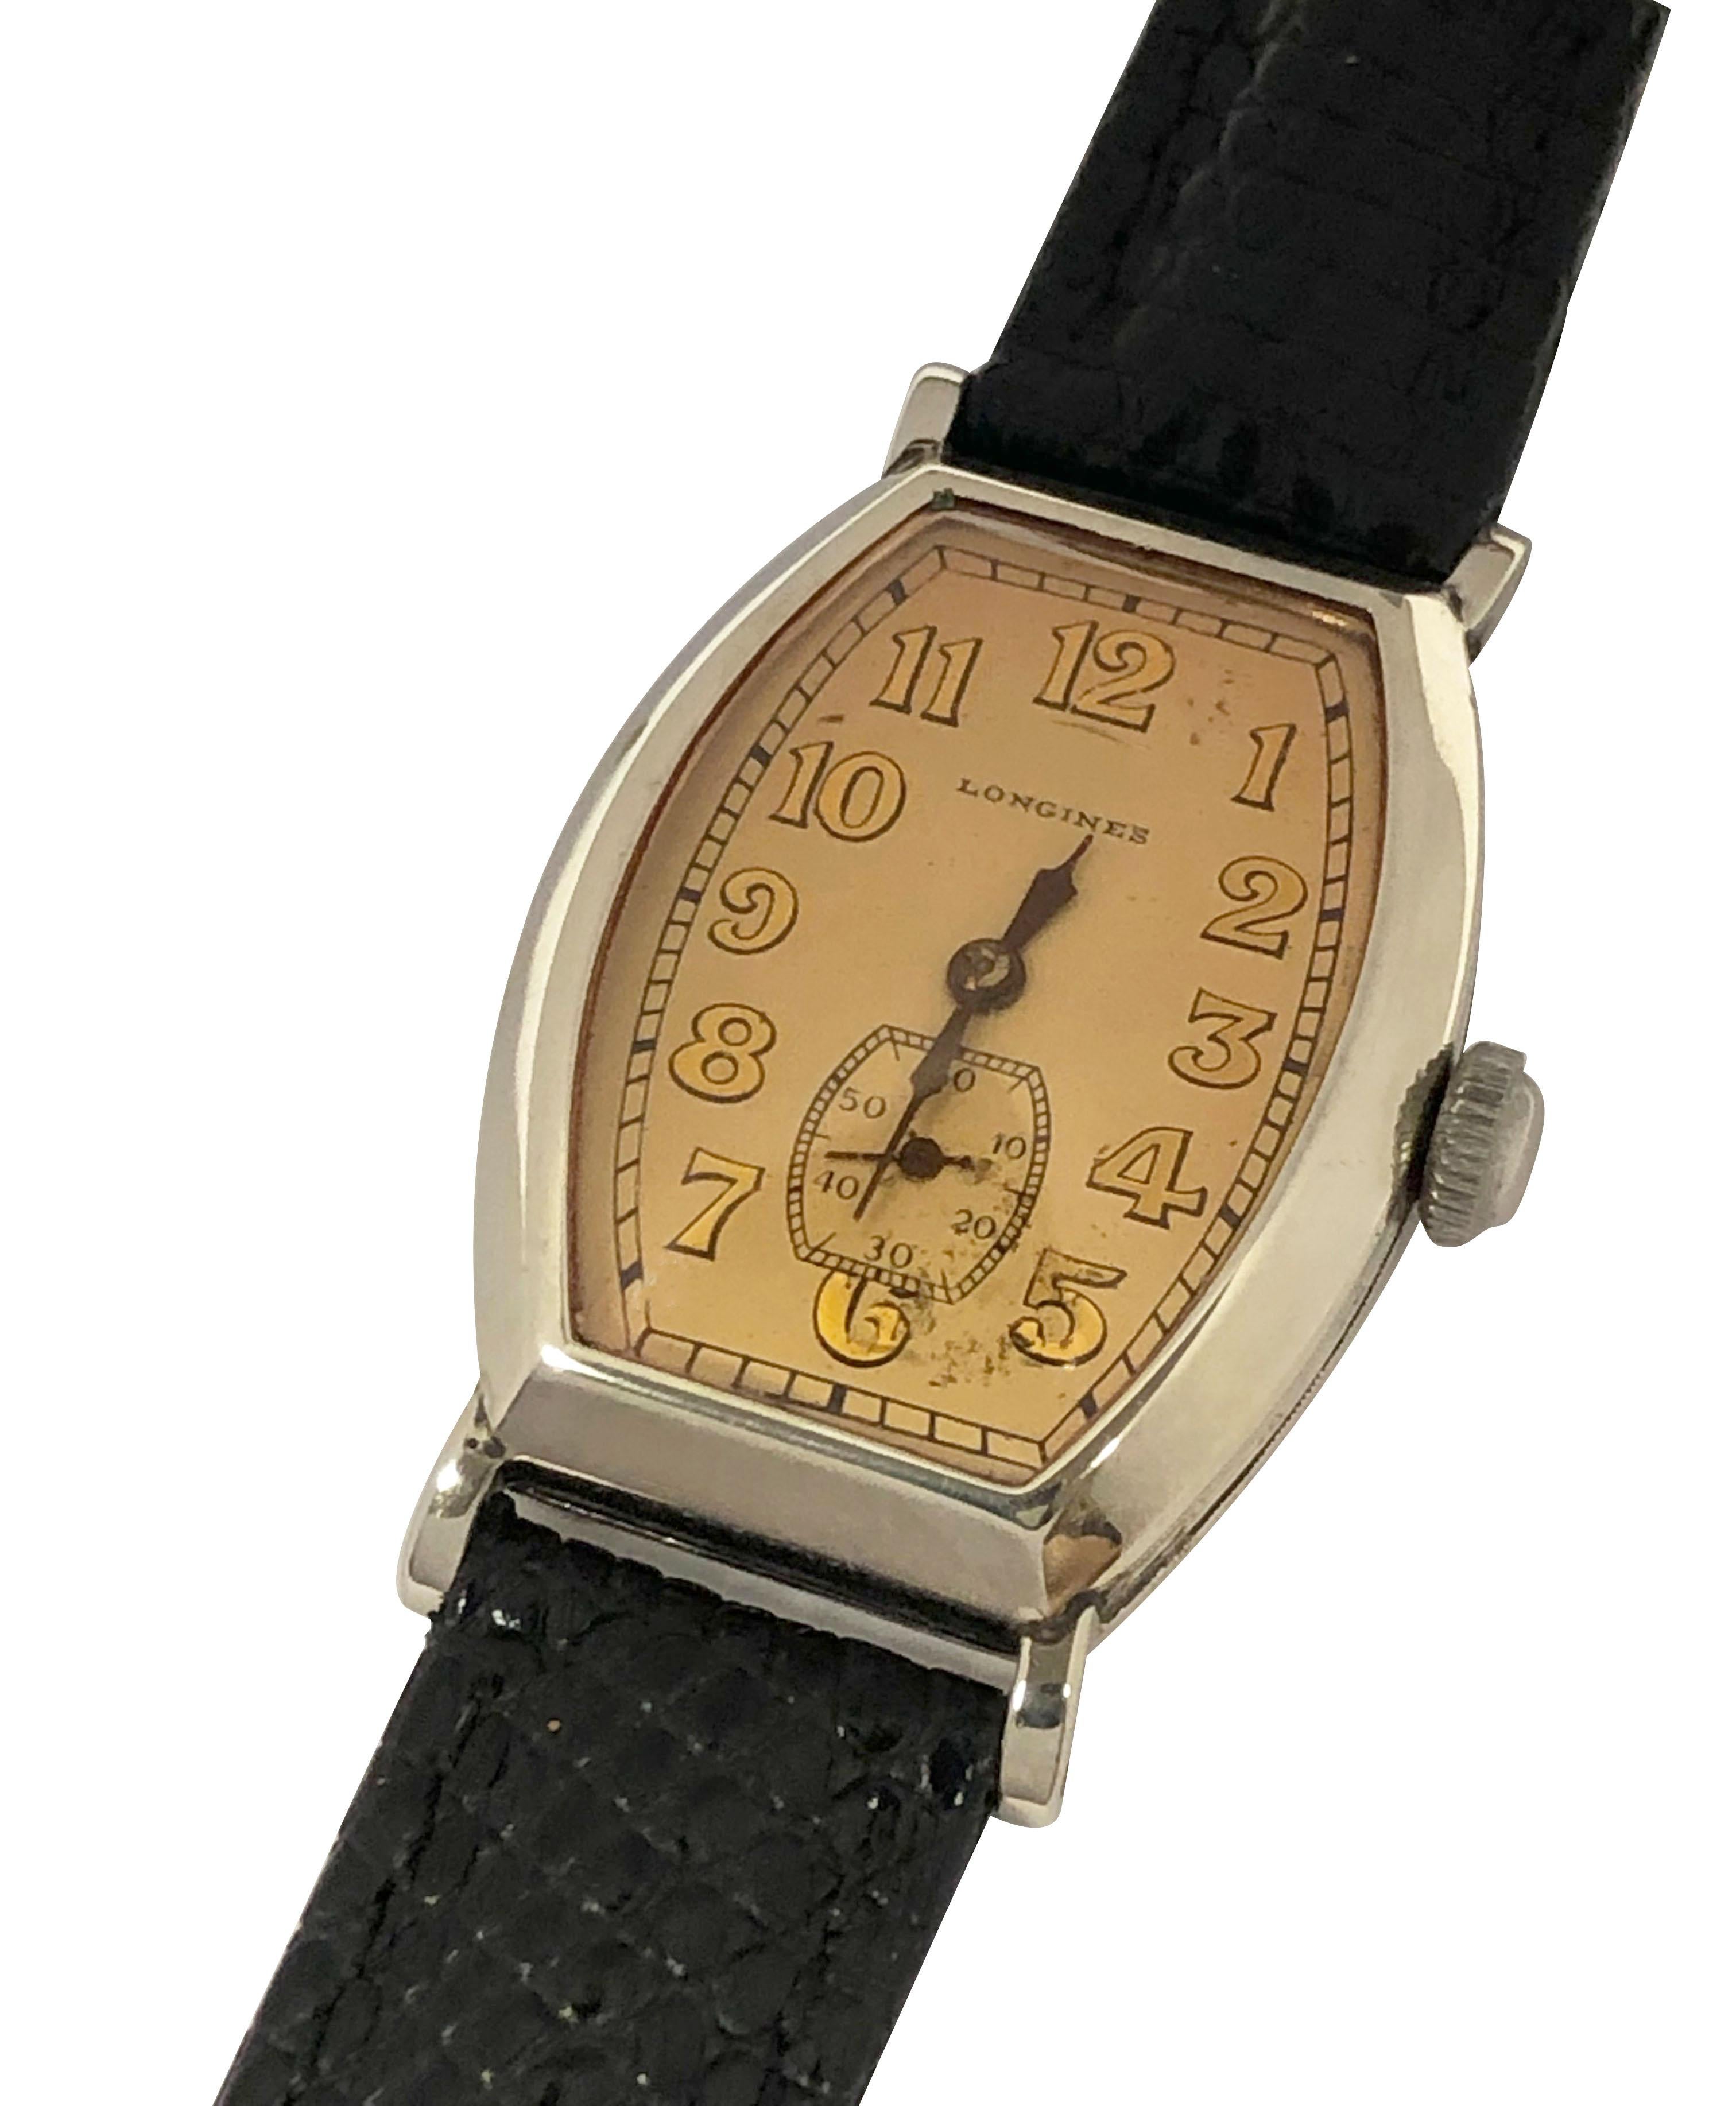 Circa 1930 Longines gents Wrist Watch, 33 x 26 M.M. 14k White Gold filled Tonneau shape case with engraved details and flared lugs. 15 jewel nickle lever mechanical, manual wind movement, original Silver Satin dial with Gold embossed Arabic numerals